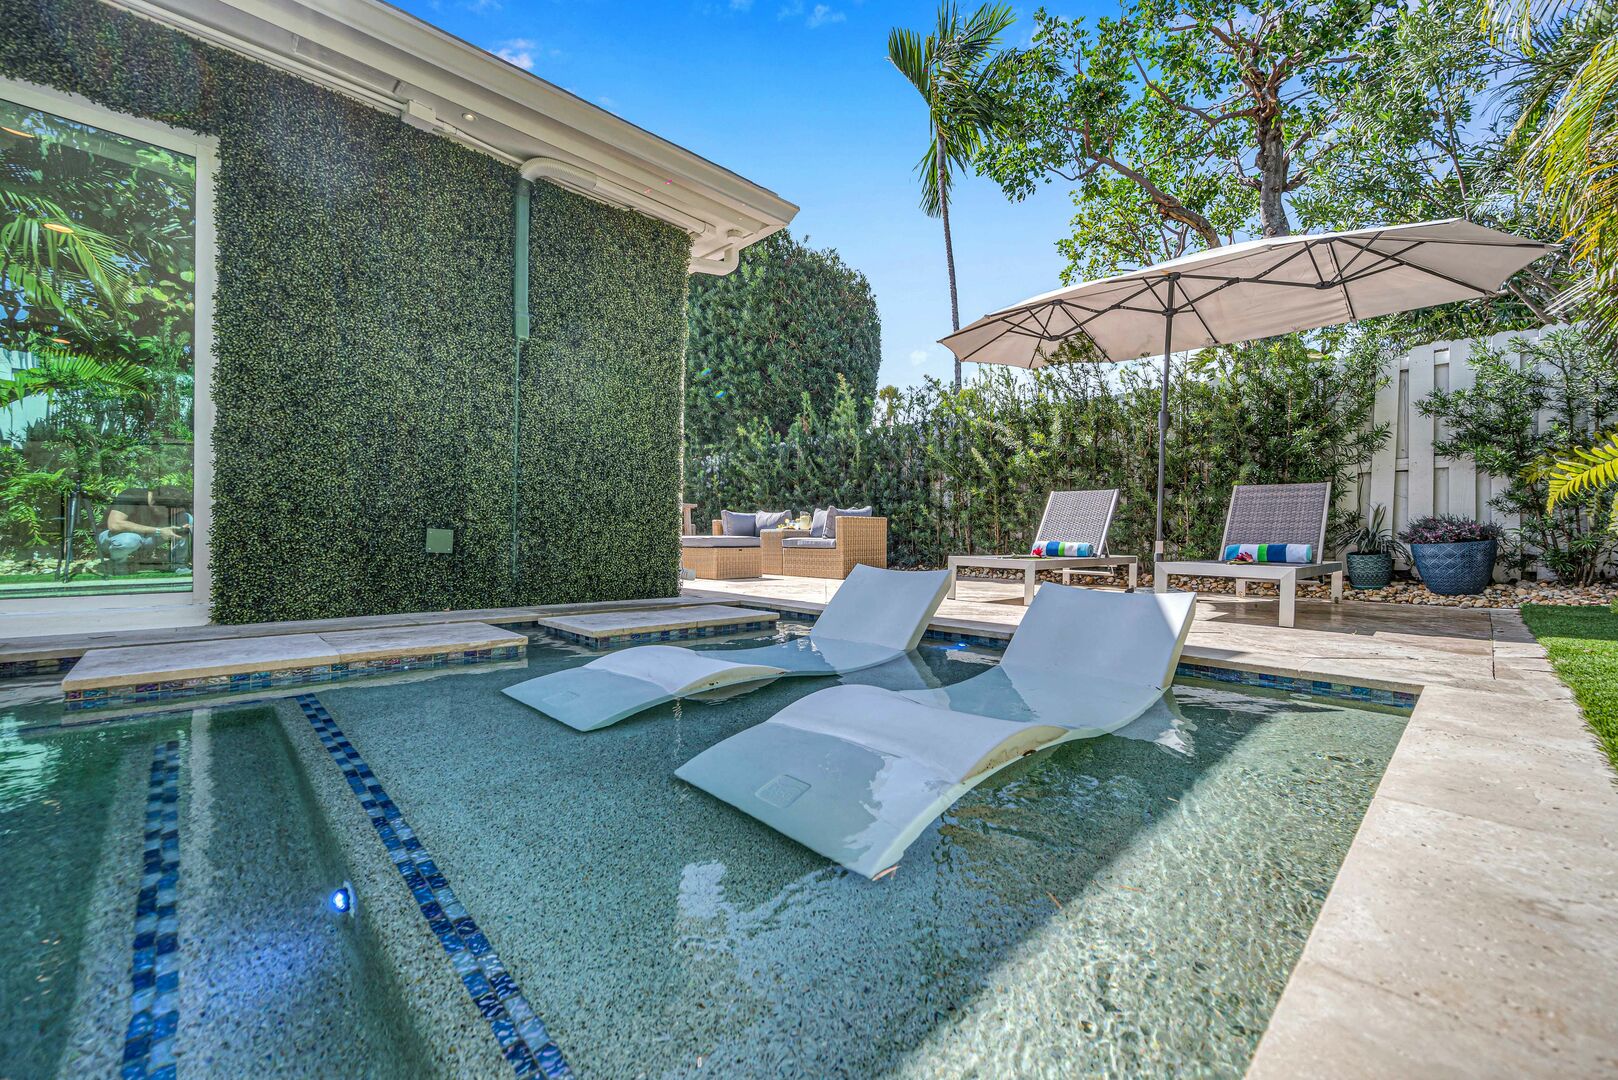 The lush garden oasis features a heated pool with its tanning shelf, two lounger areas, dining space and grill.